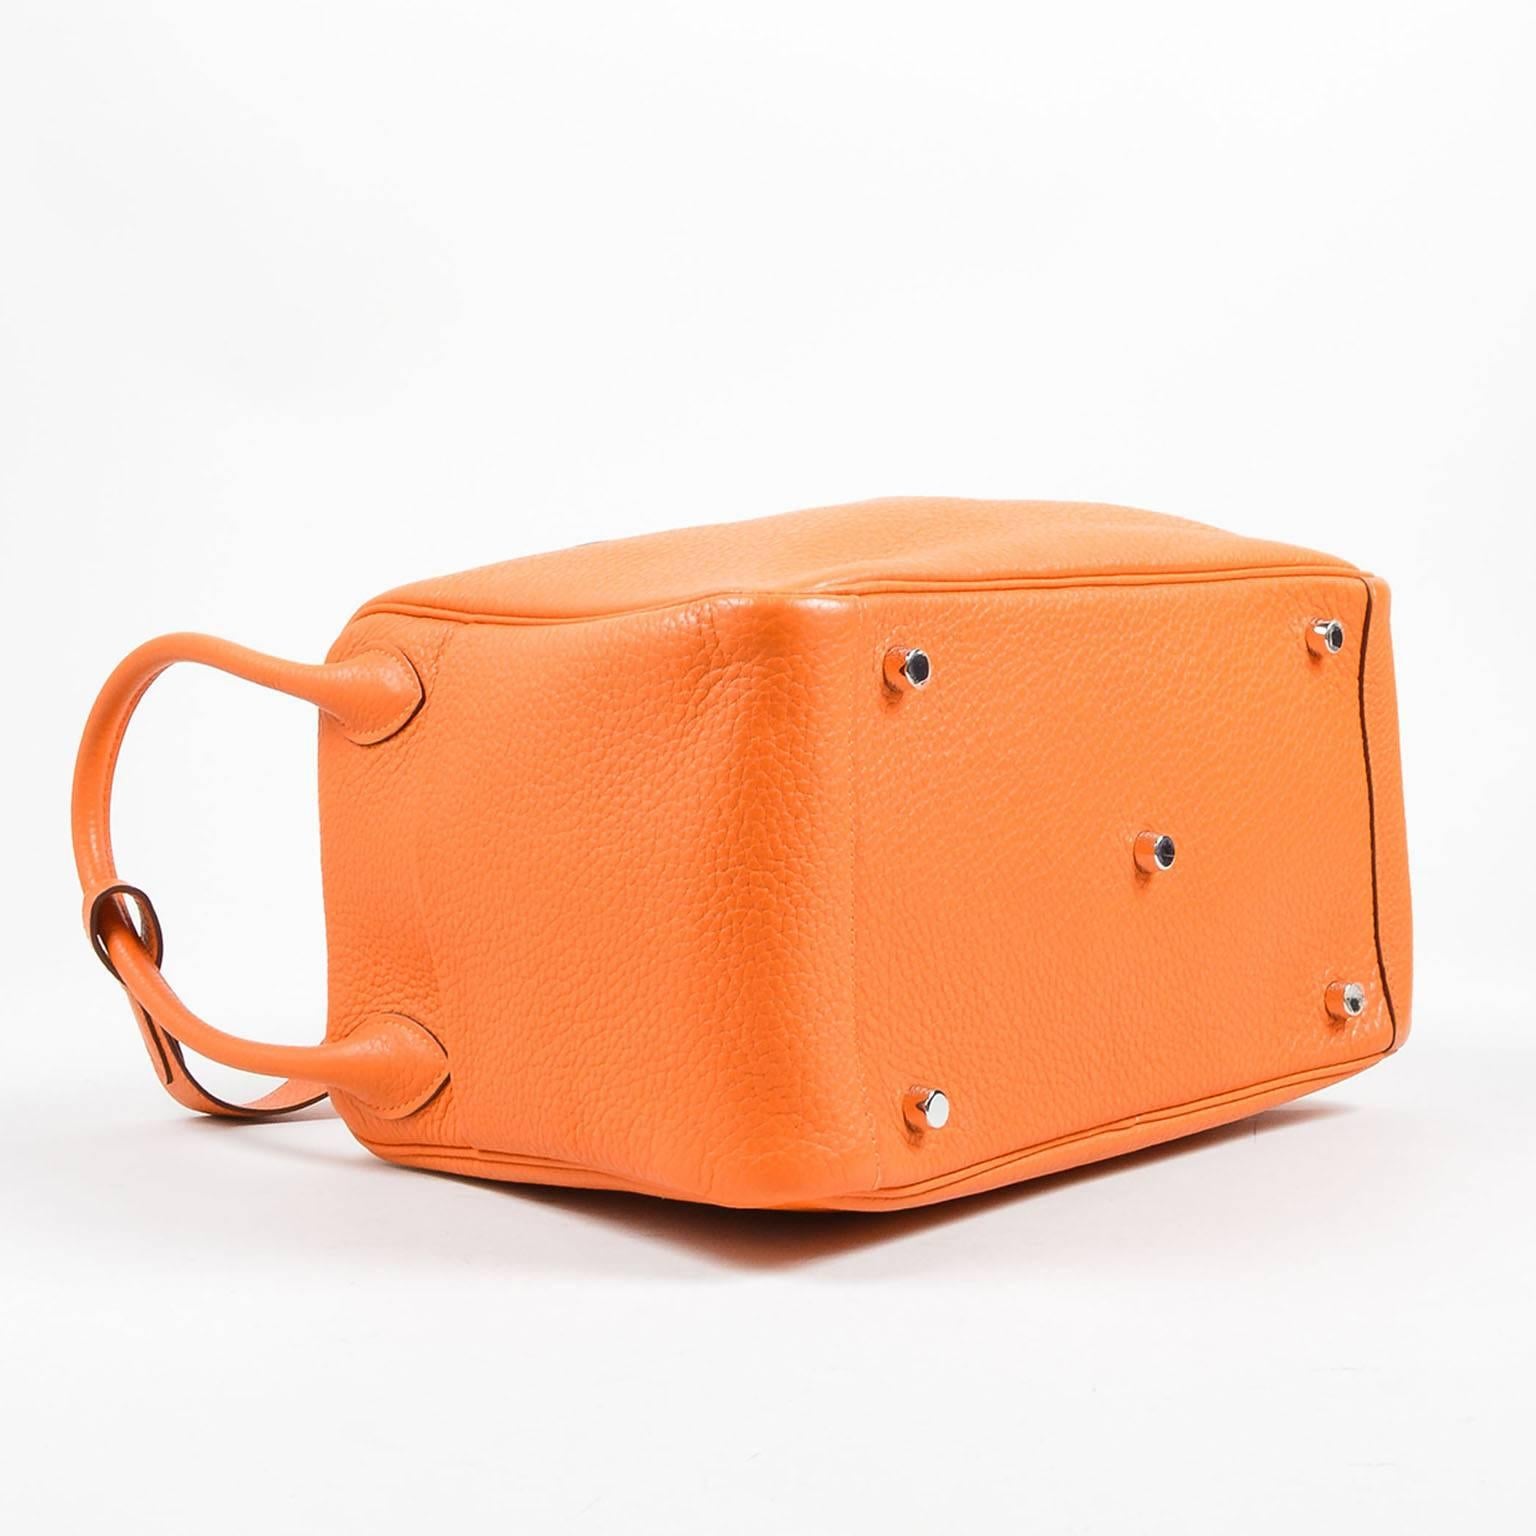 From 2010, the "Lindy" satchel by Hermes is constructed of supple and slouchy "Clemence" leather in a bright orange tone. Silver-tone hardware. Dual zipper closure at top. Twist-lock fastening. Rolled handles at sides; shoulder